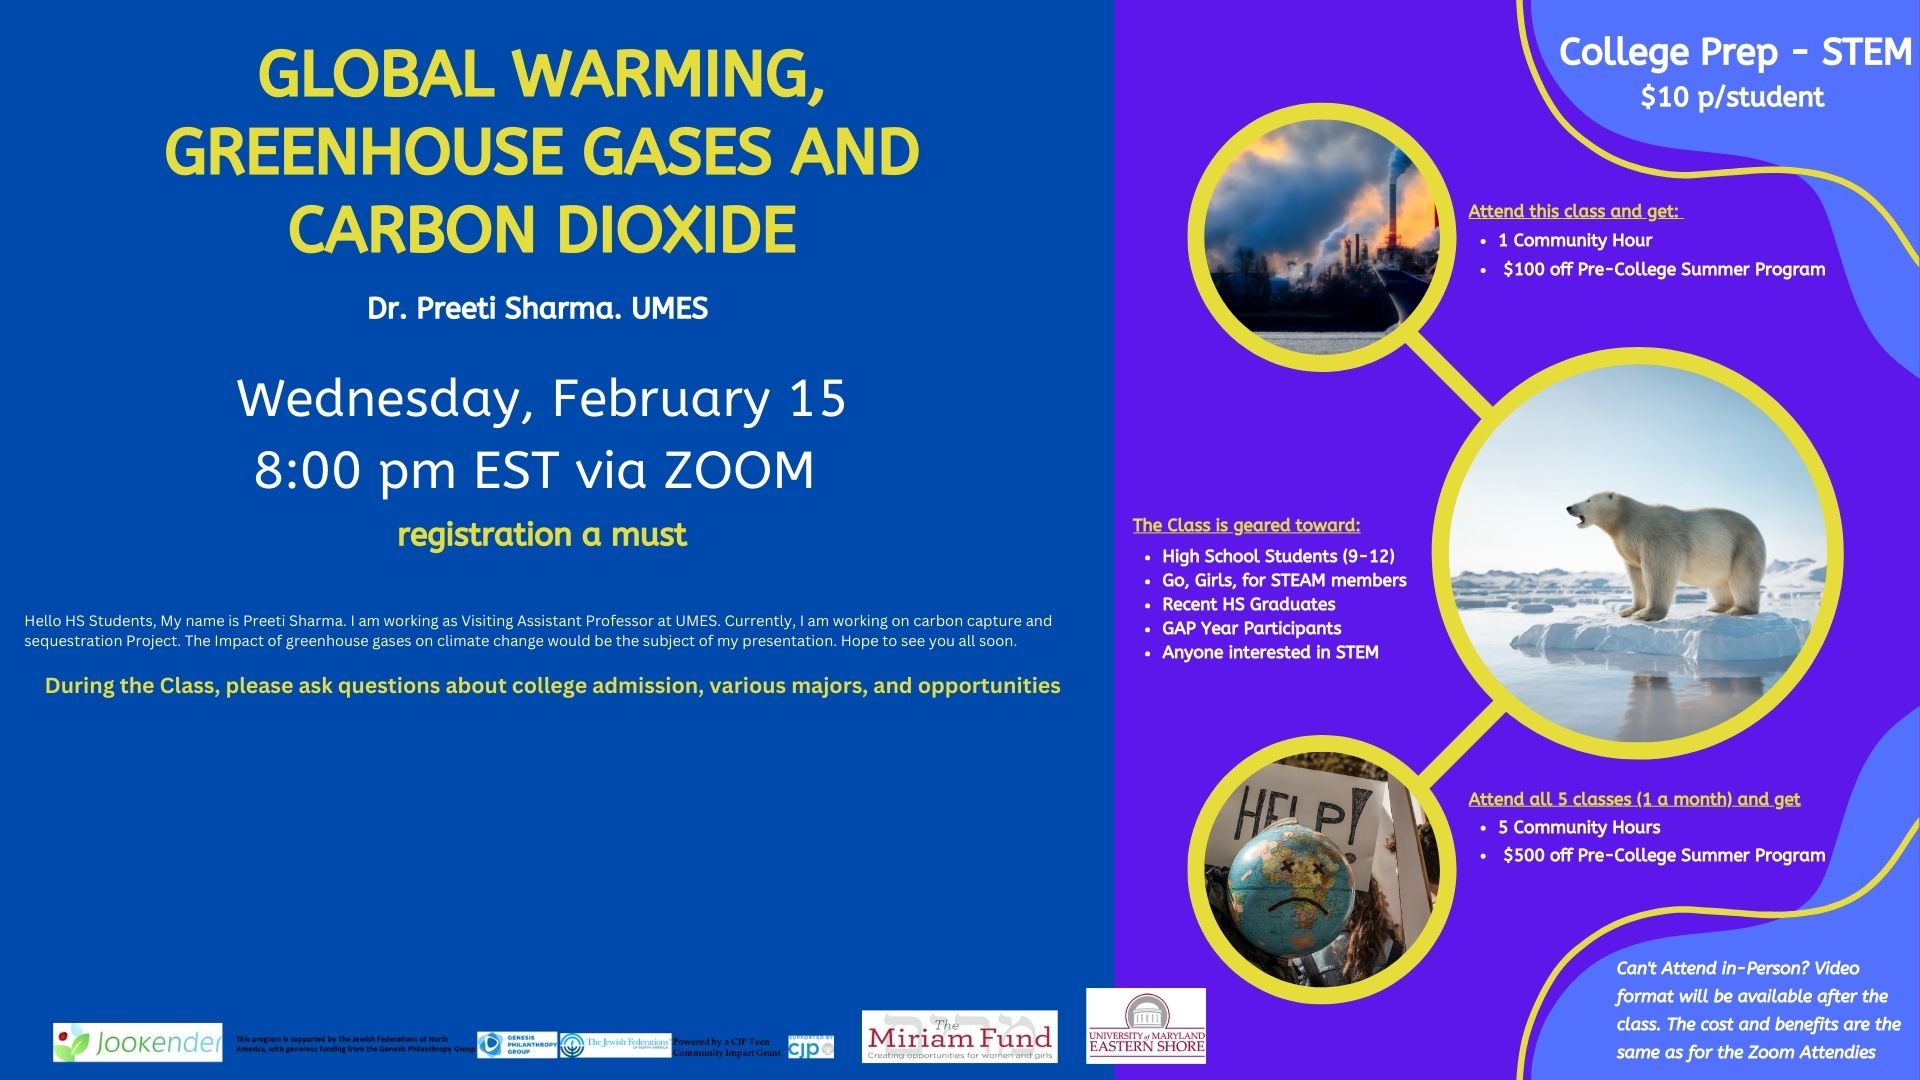 Global Warming, Greenhouse Gases and Carbon Dioxide